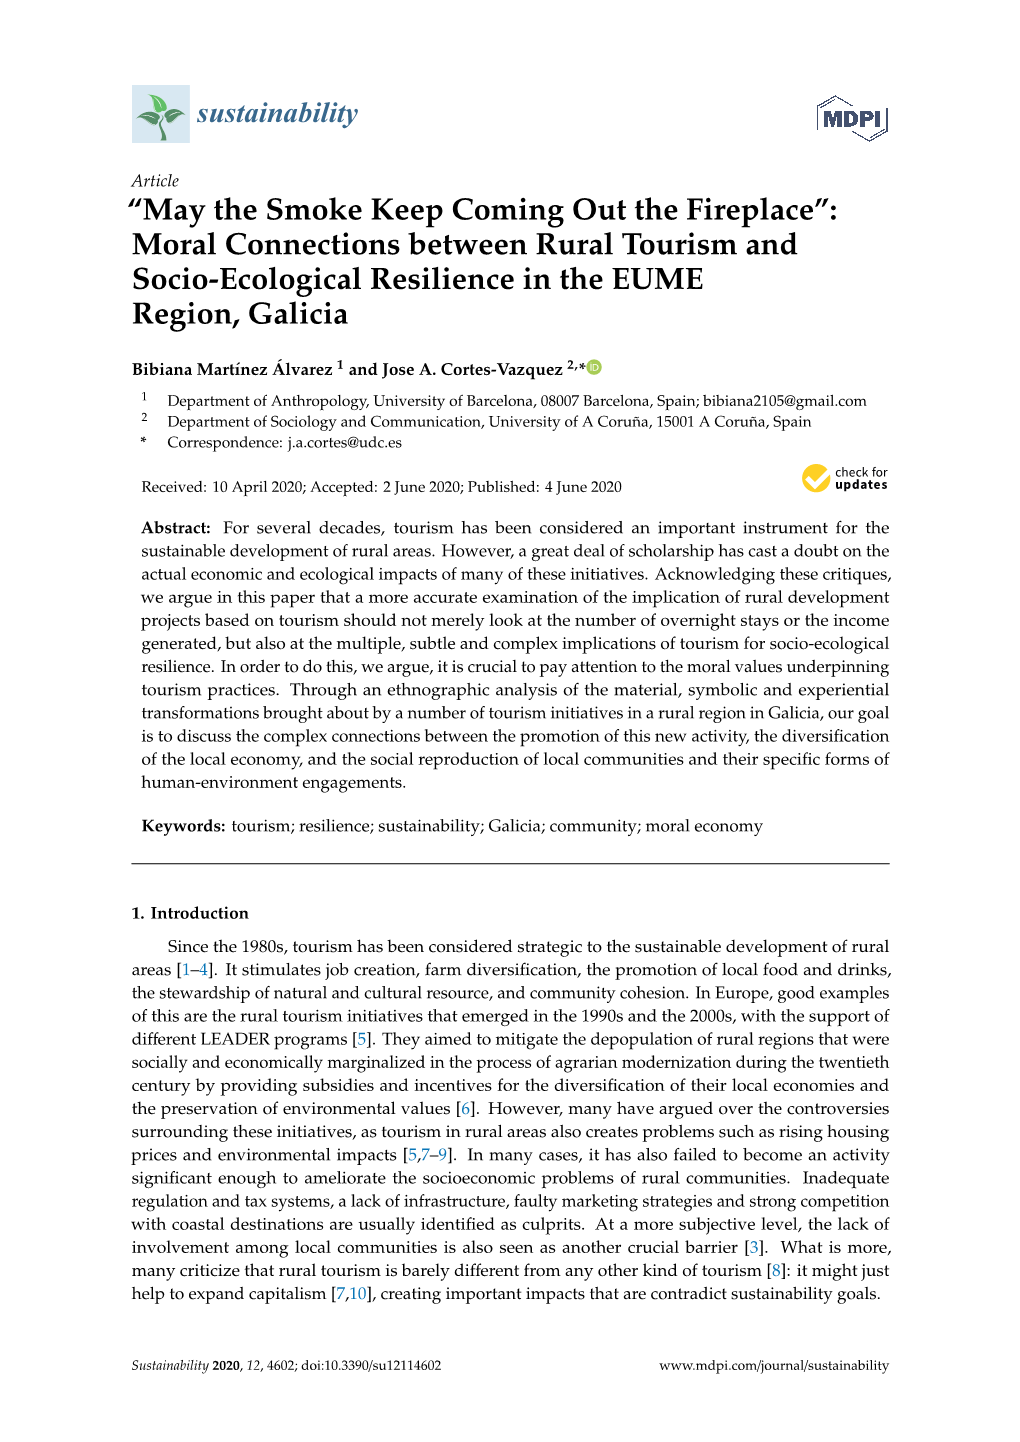 Moral Connections Between Rural Tourism and Socio-Ecological Resilience in the EUME Region, Galicia